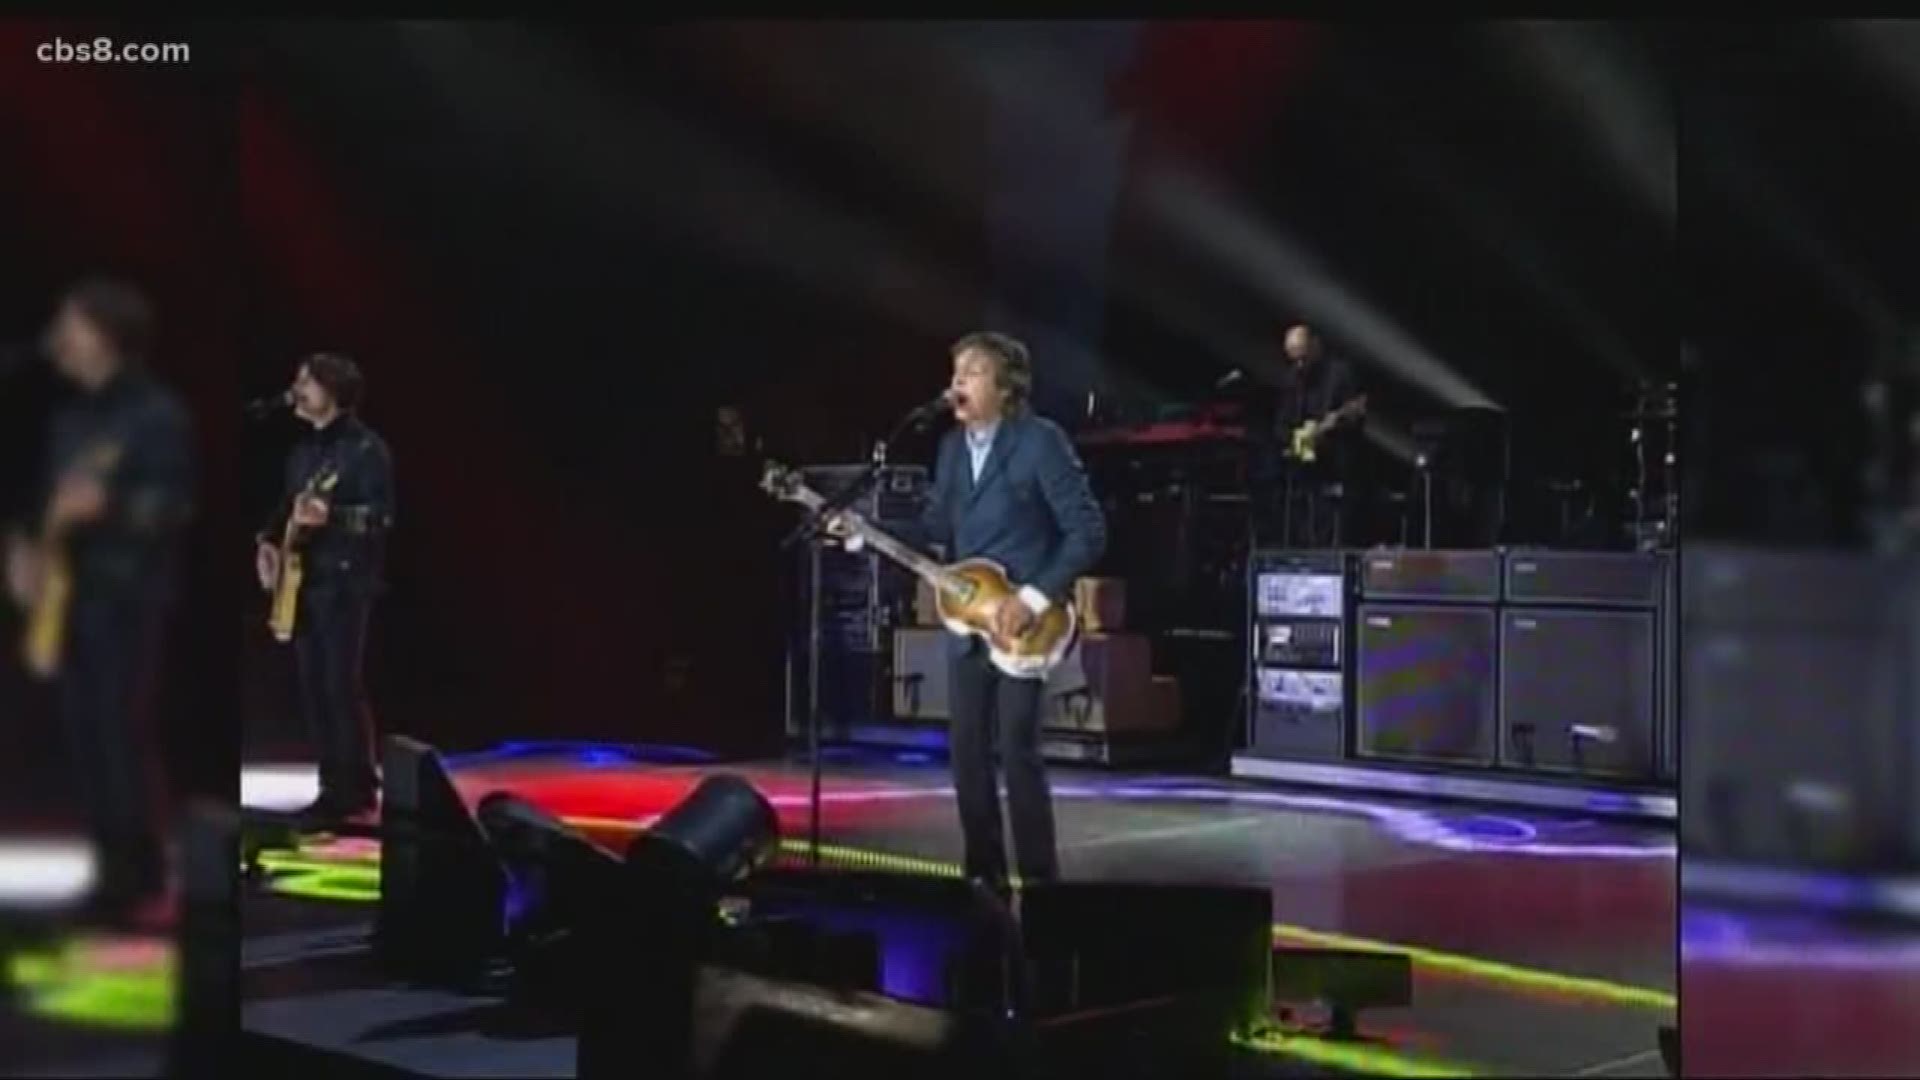 Paul McCartney returned to San Diego Saturday for his Freshen Up concert at Petco Park, where he first performed in 2014.